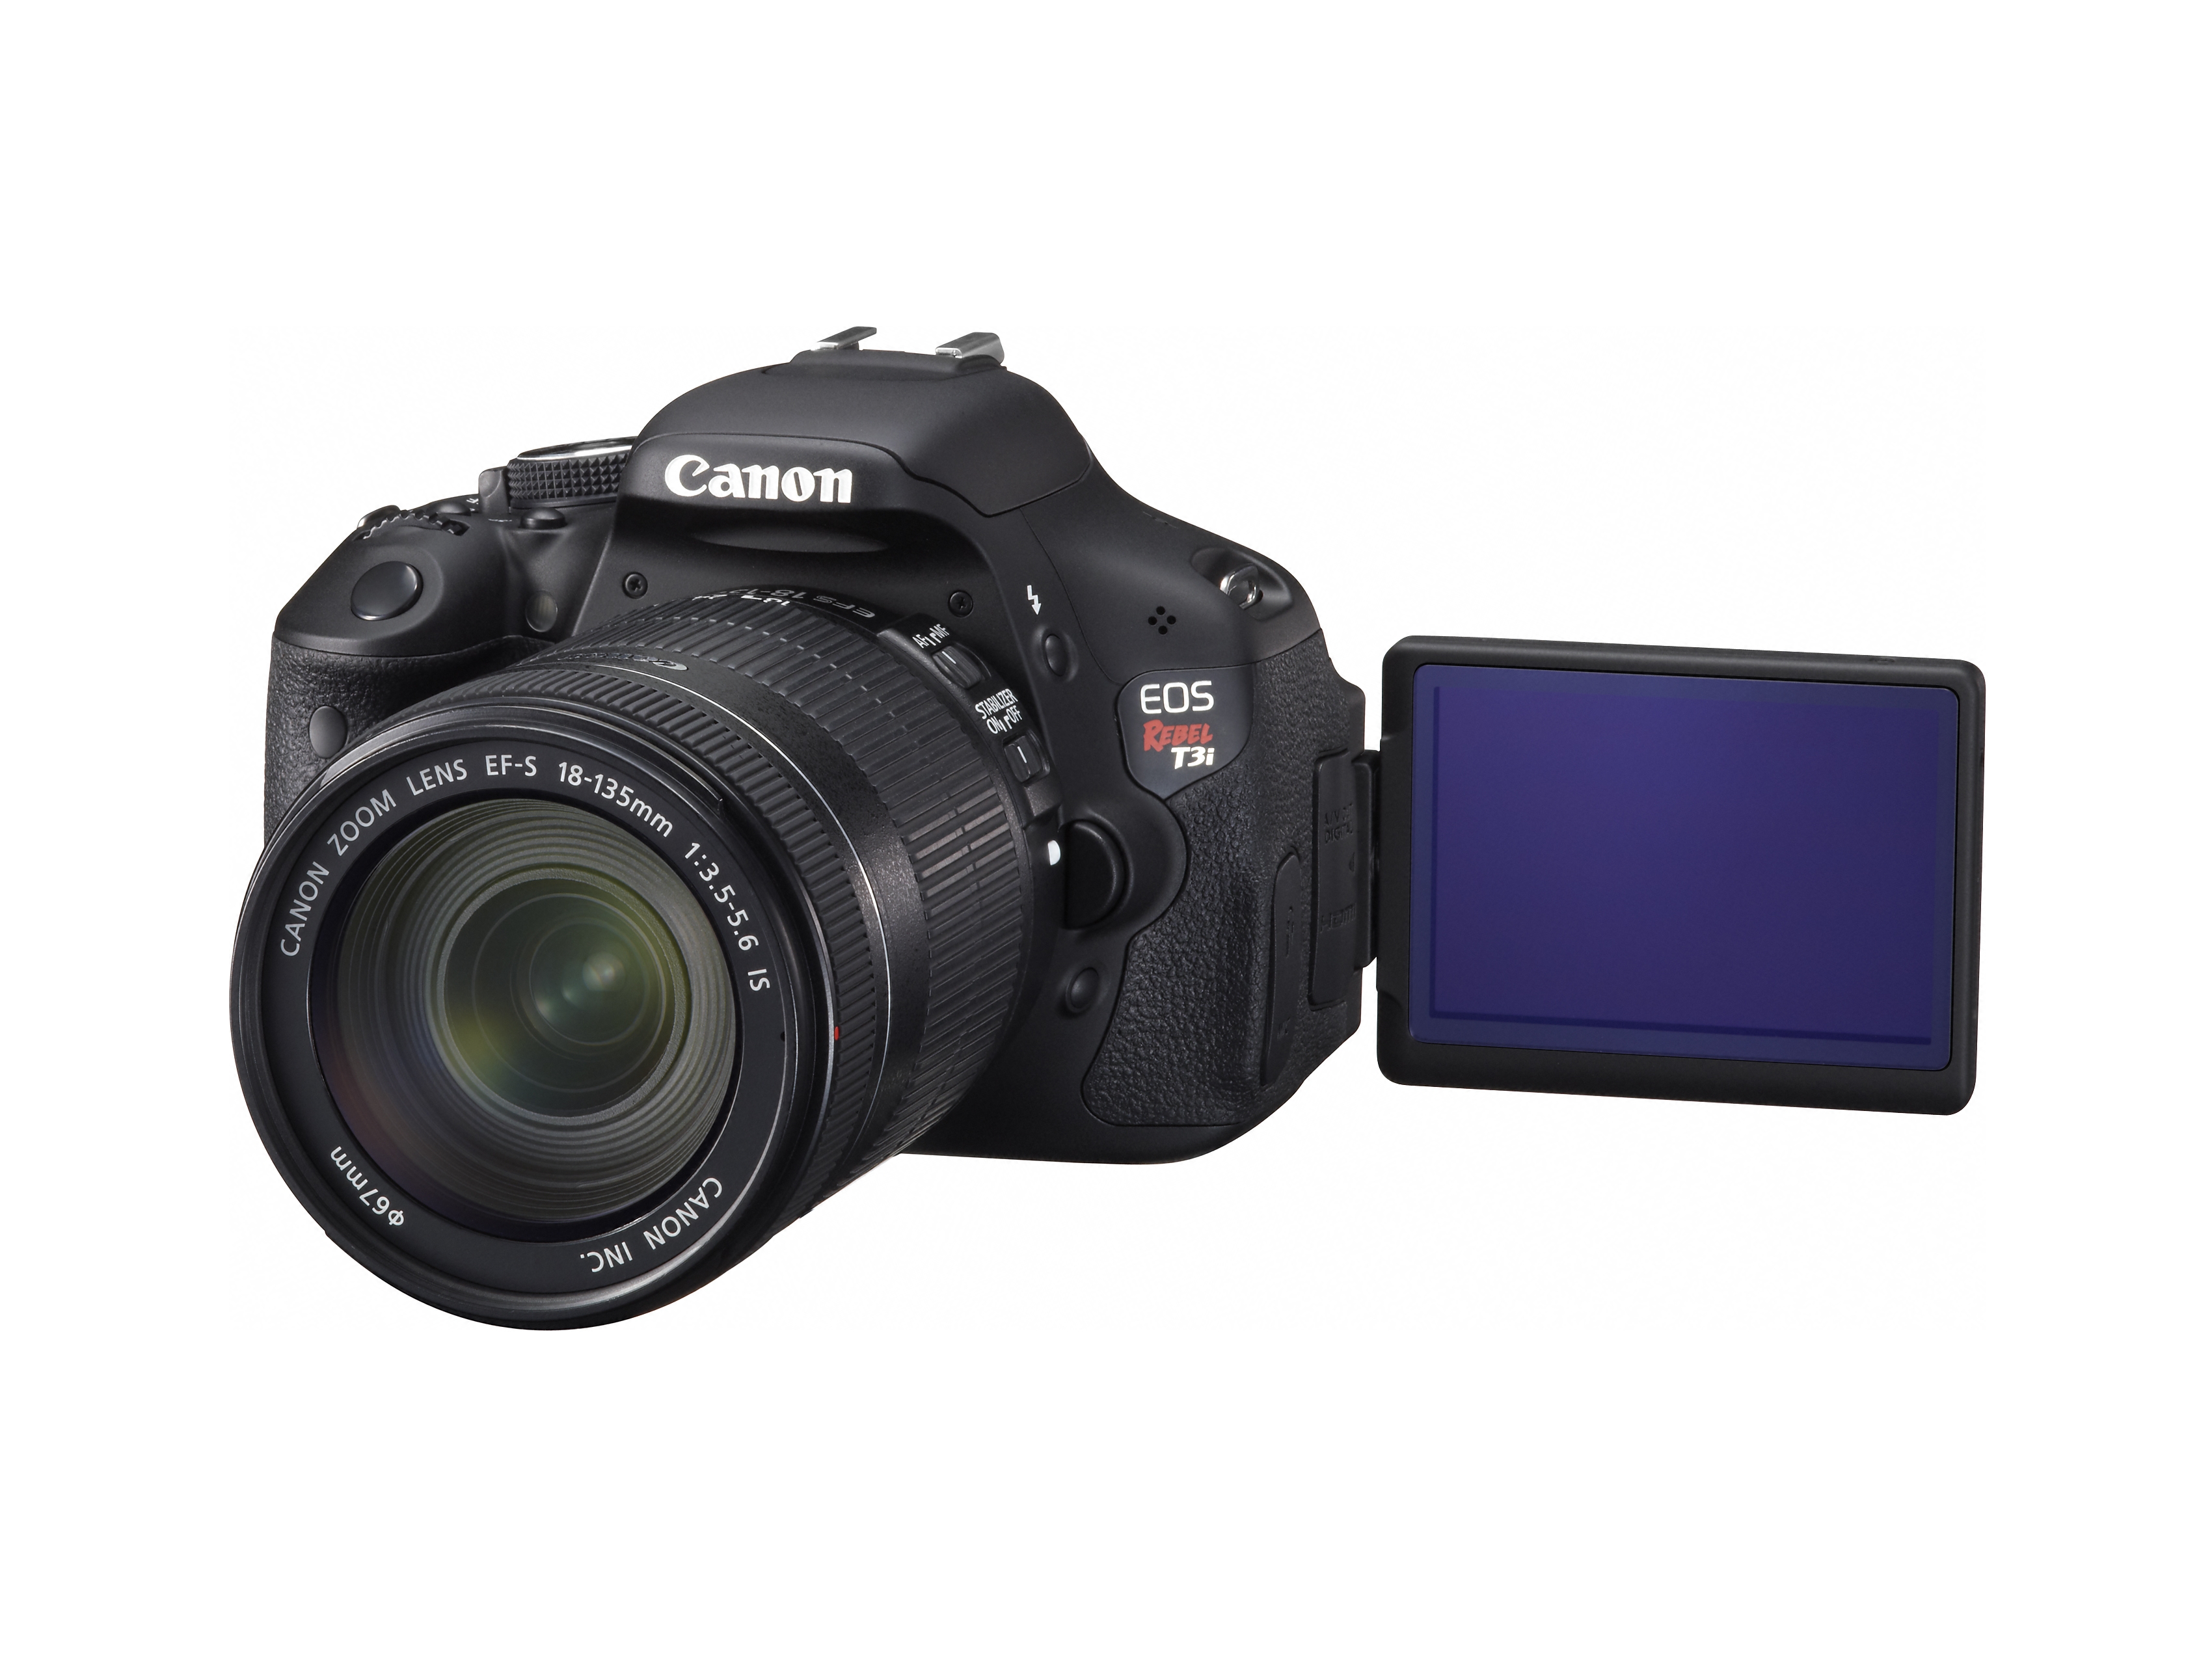 Canon Rebel T3i Overview